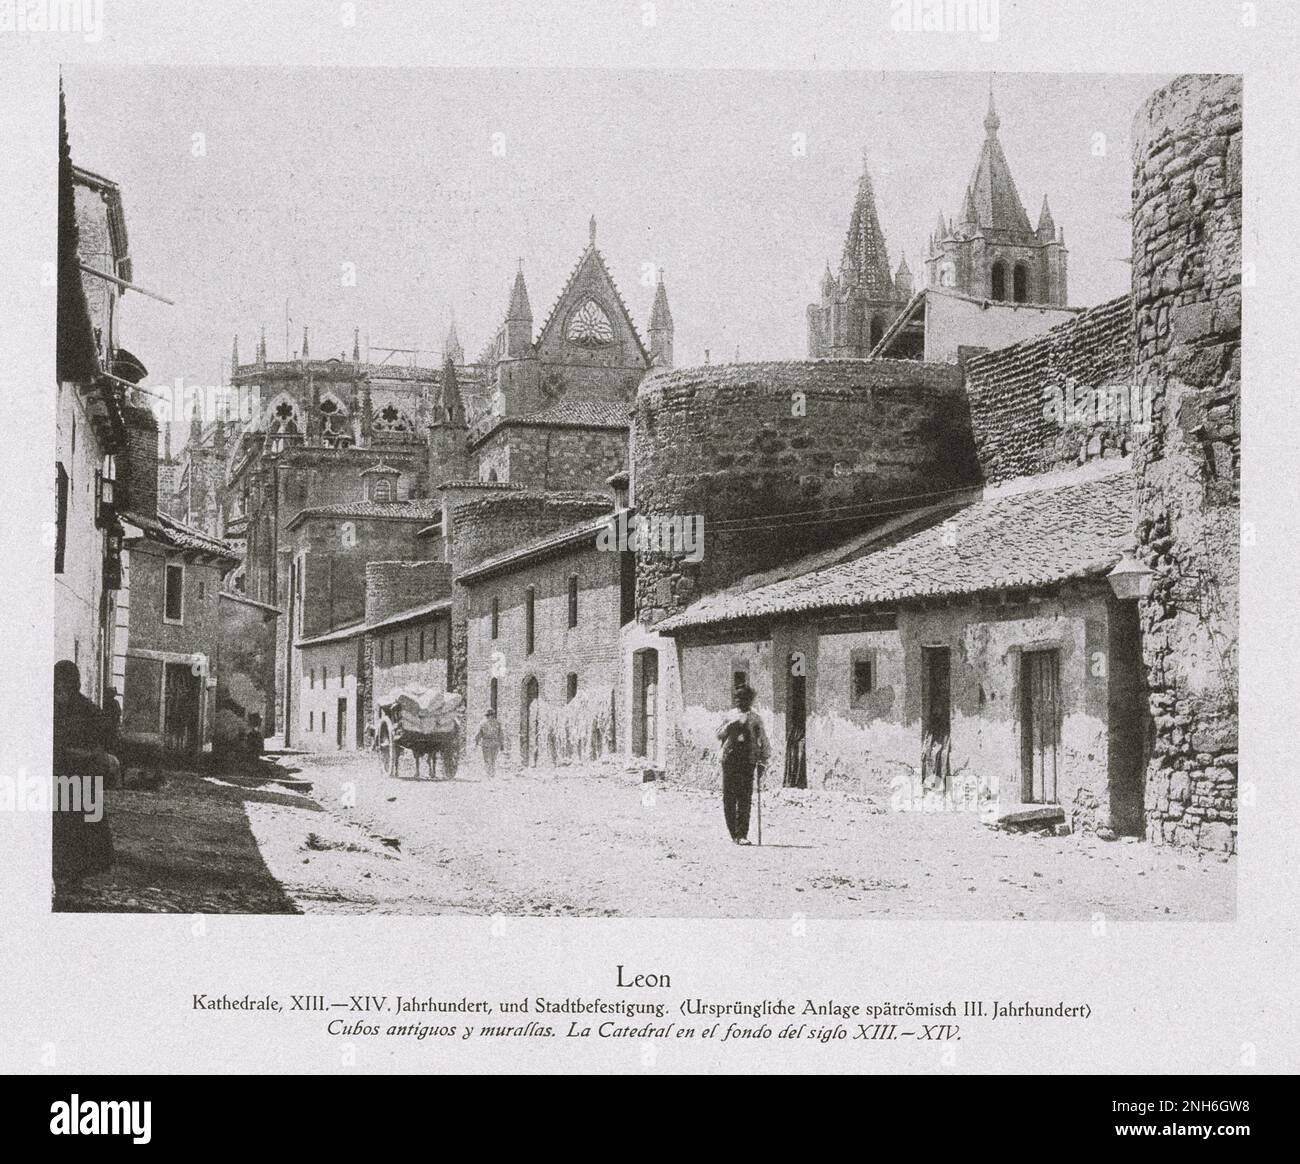 Architecture of Old Spain. Vintage photo of León Cathedral of XIII - XIV centuries, and city fortification. (Original site of a late Roman building of the 3nd century) Stock Photo